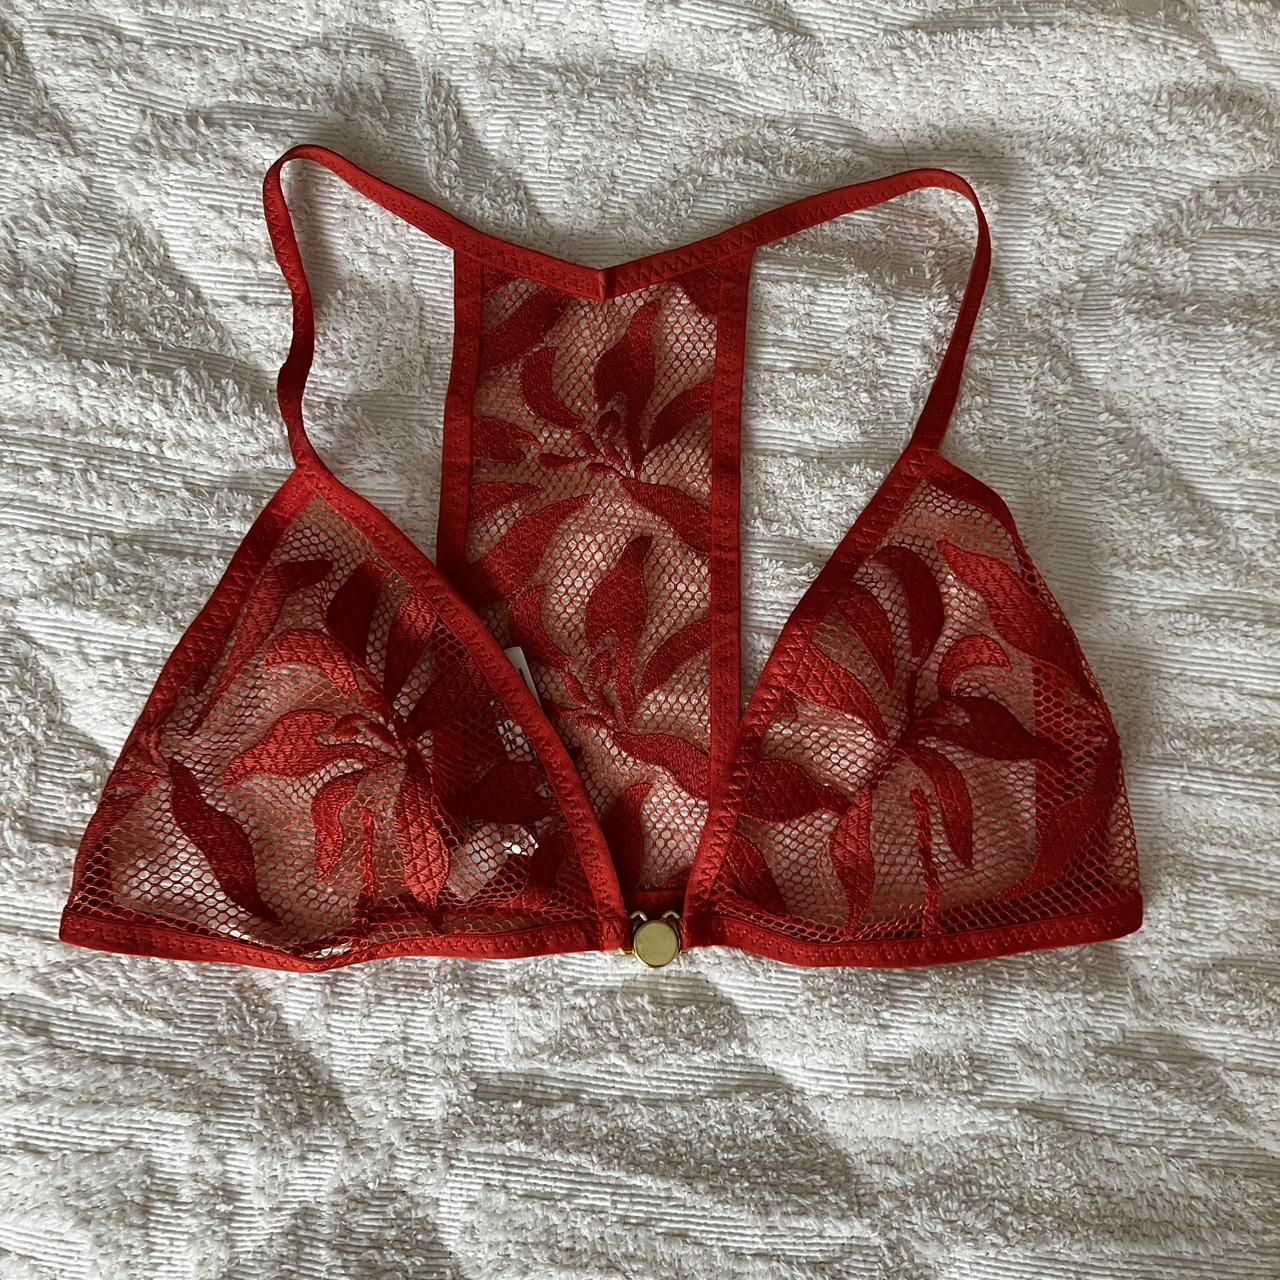 free people bralette , size medium , looks red in the